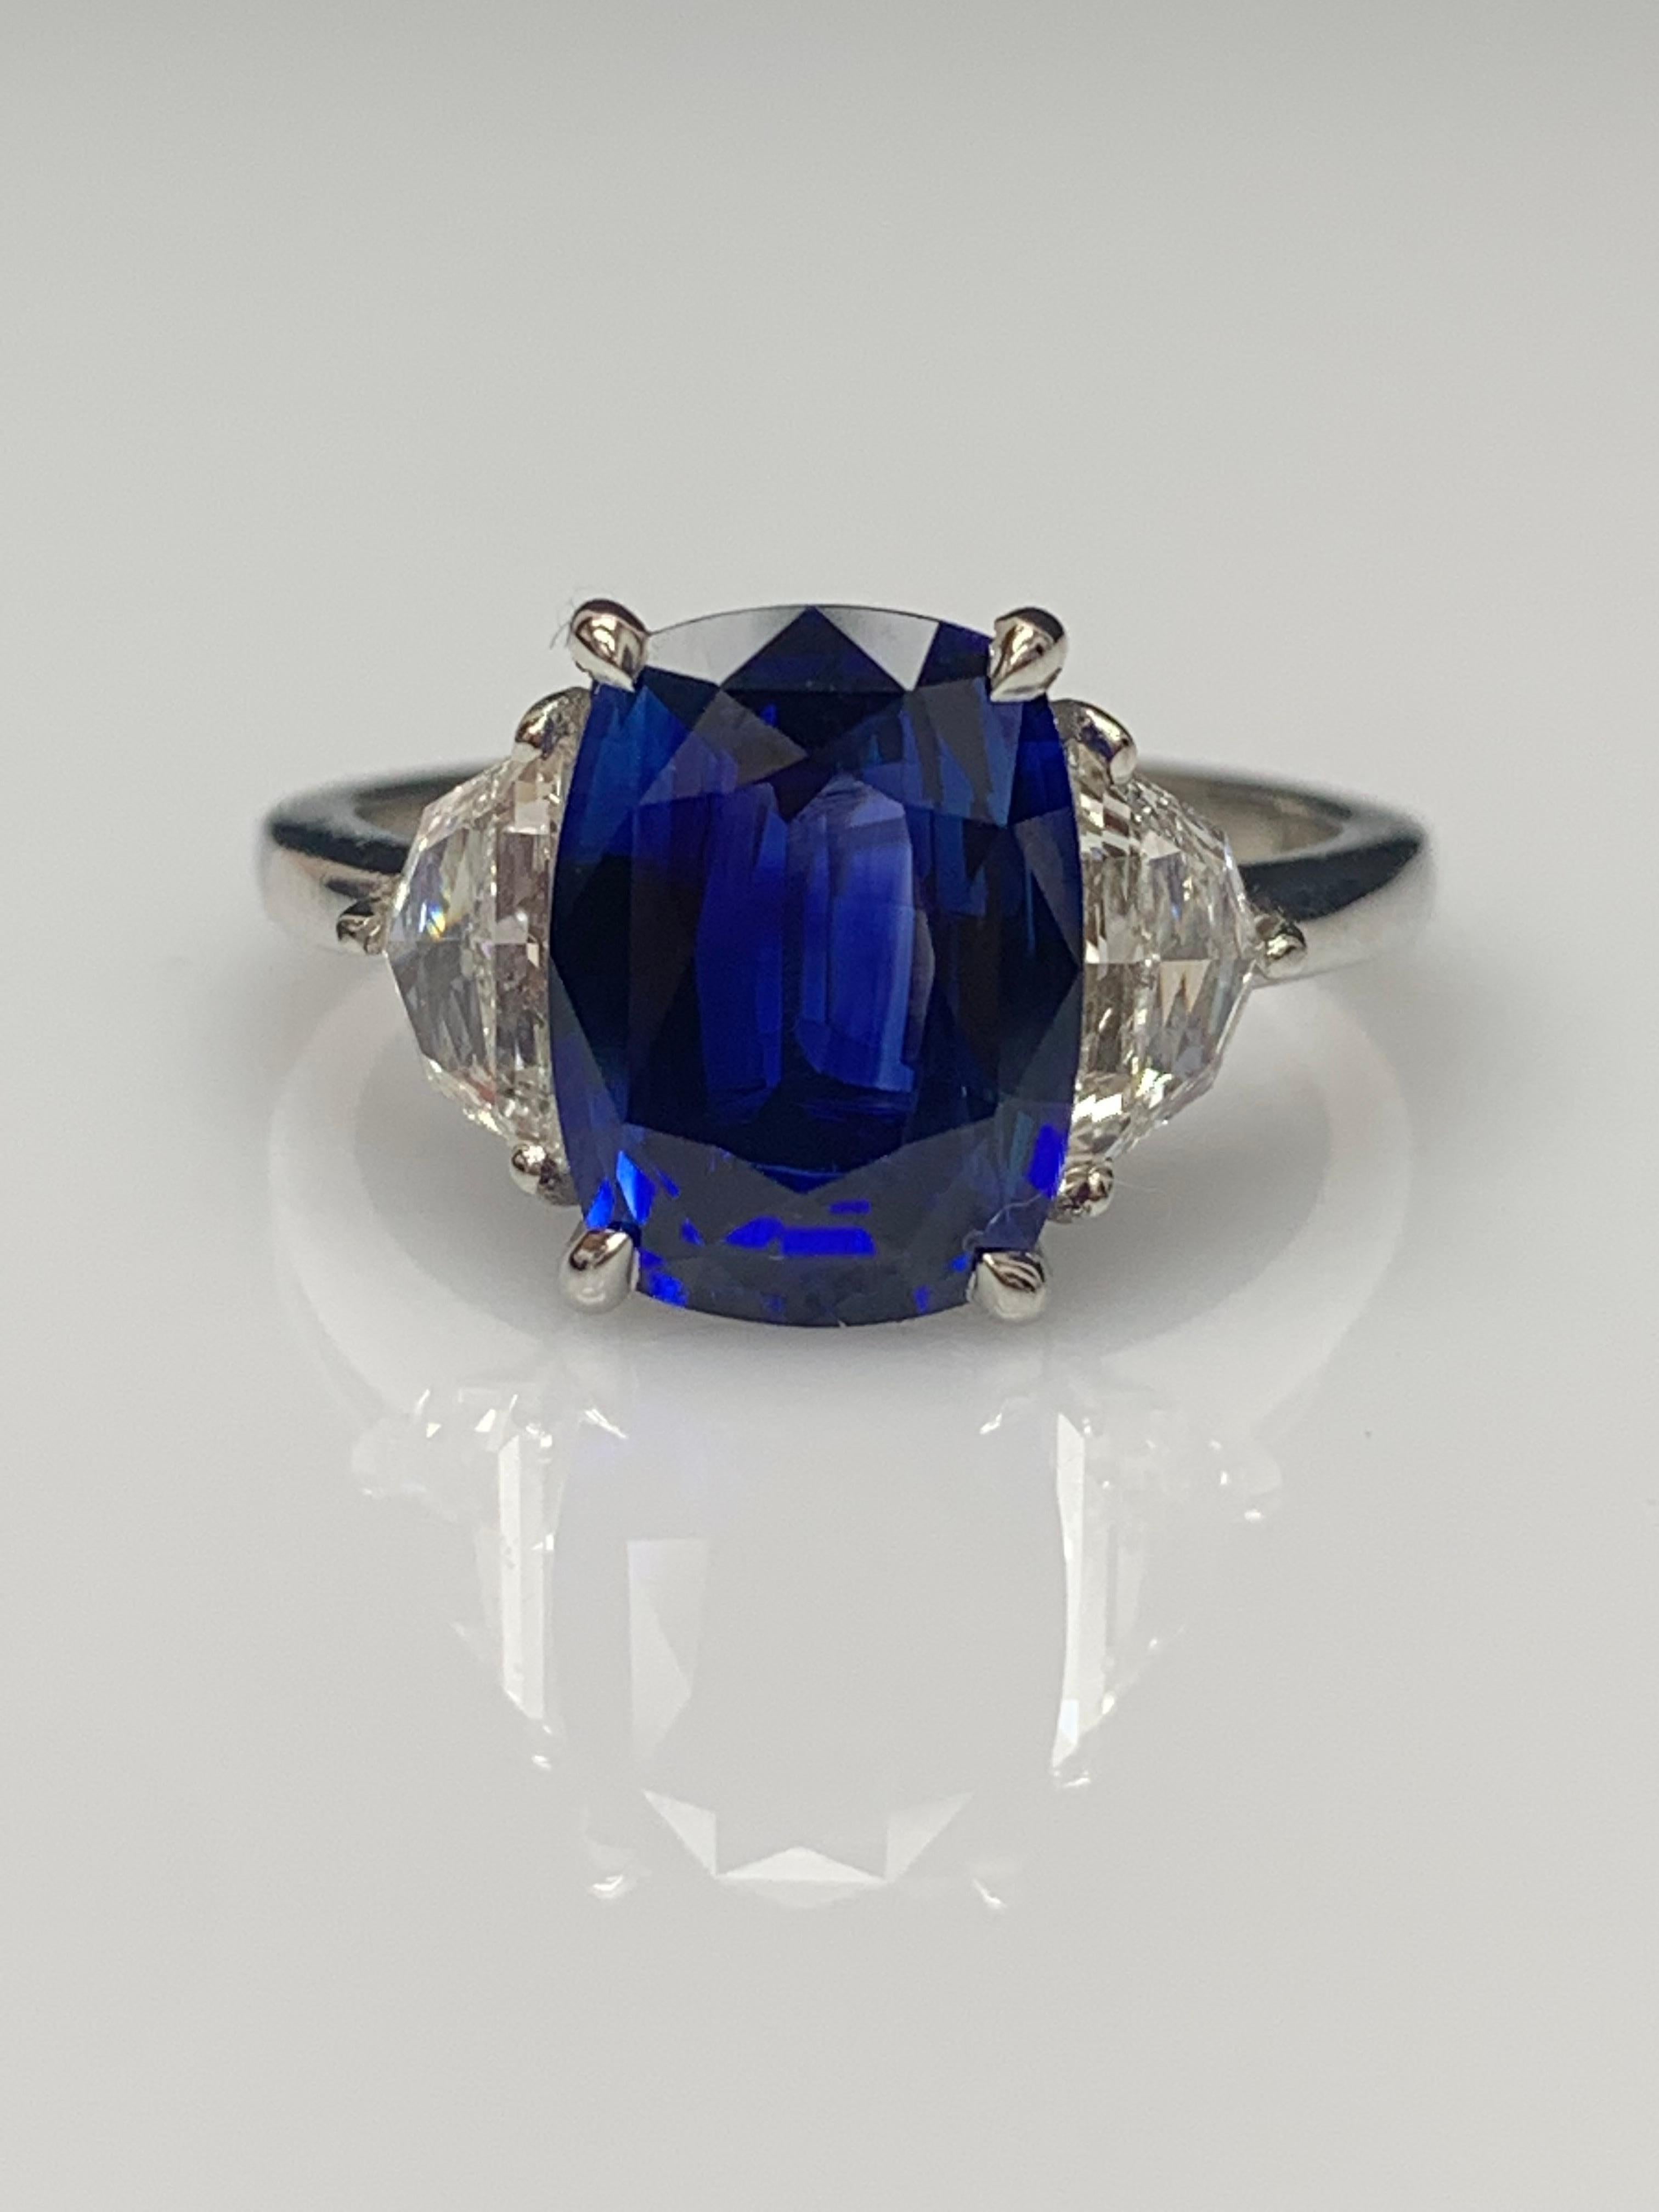 Certified 3.54 Carat Cushion Cut Blue Sapphire Diamond 3-Stone Ring in Platinum For Sale 1